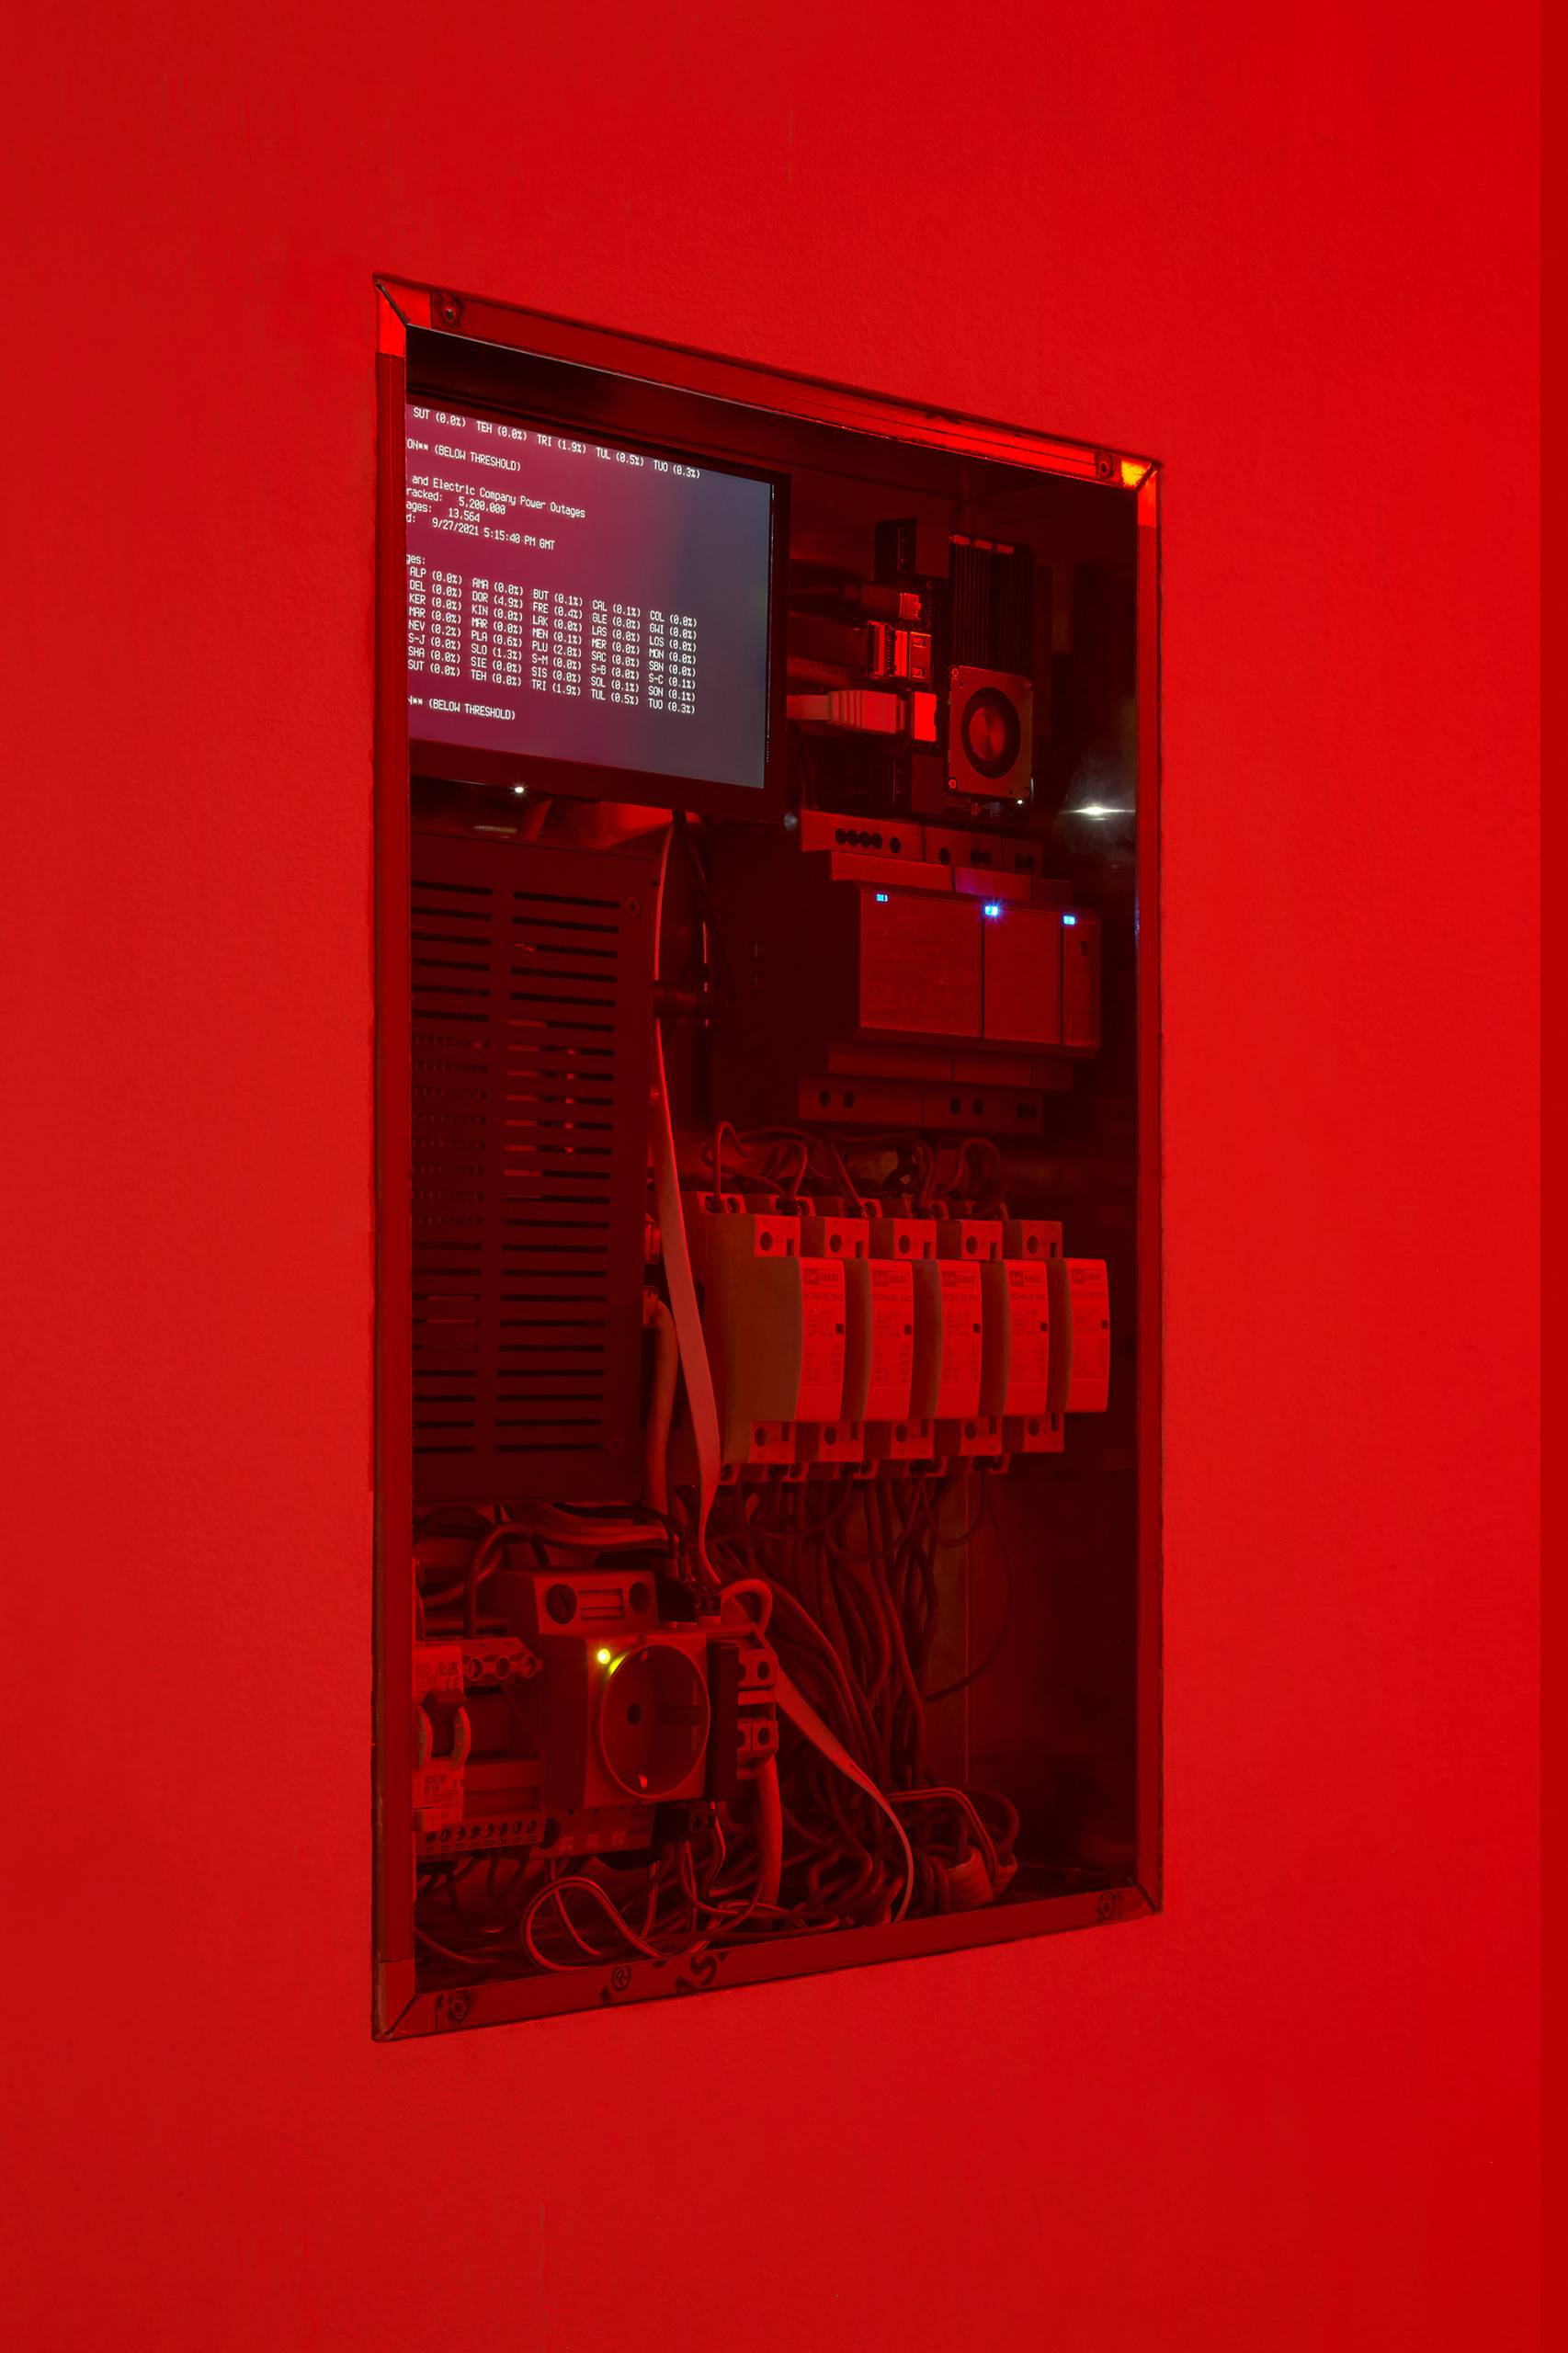 Red-tinged image of electrical box with data readings on screen